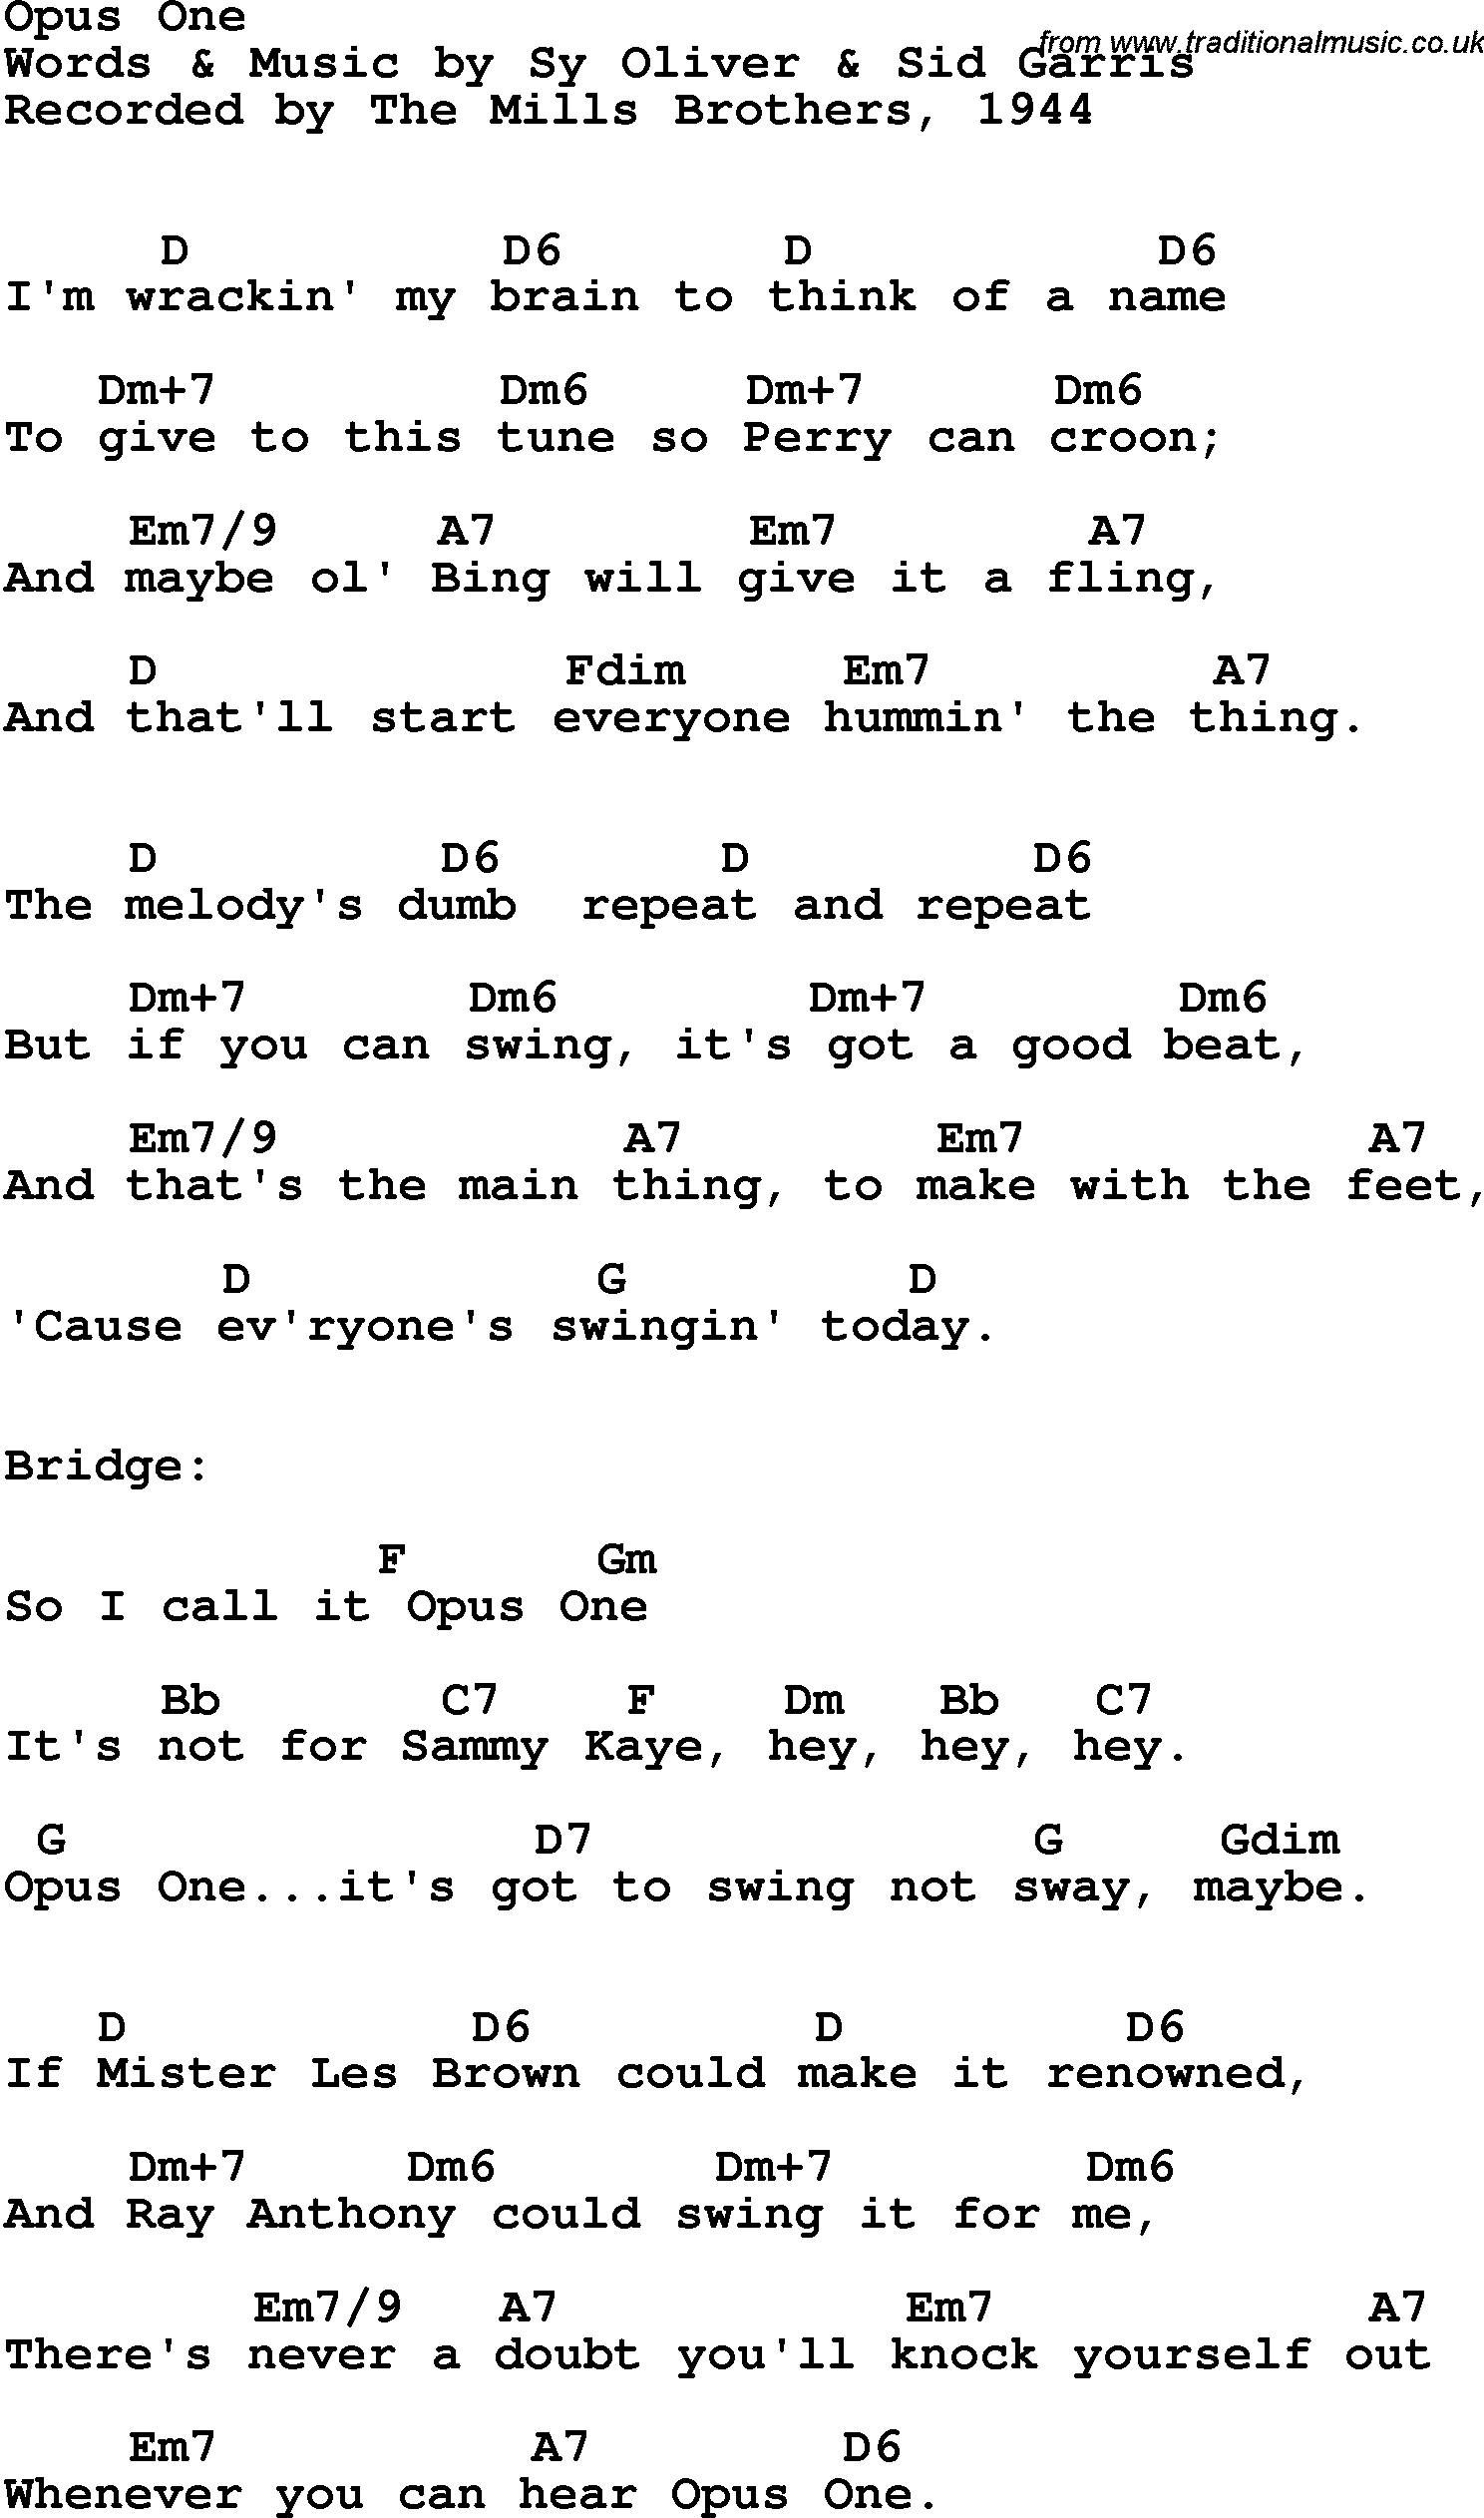 Song Lyrics with guitar chords for Opus One - The Mills Brothers, 1944